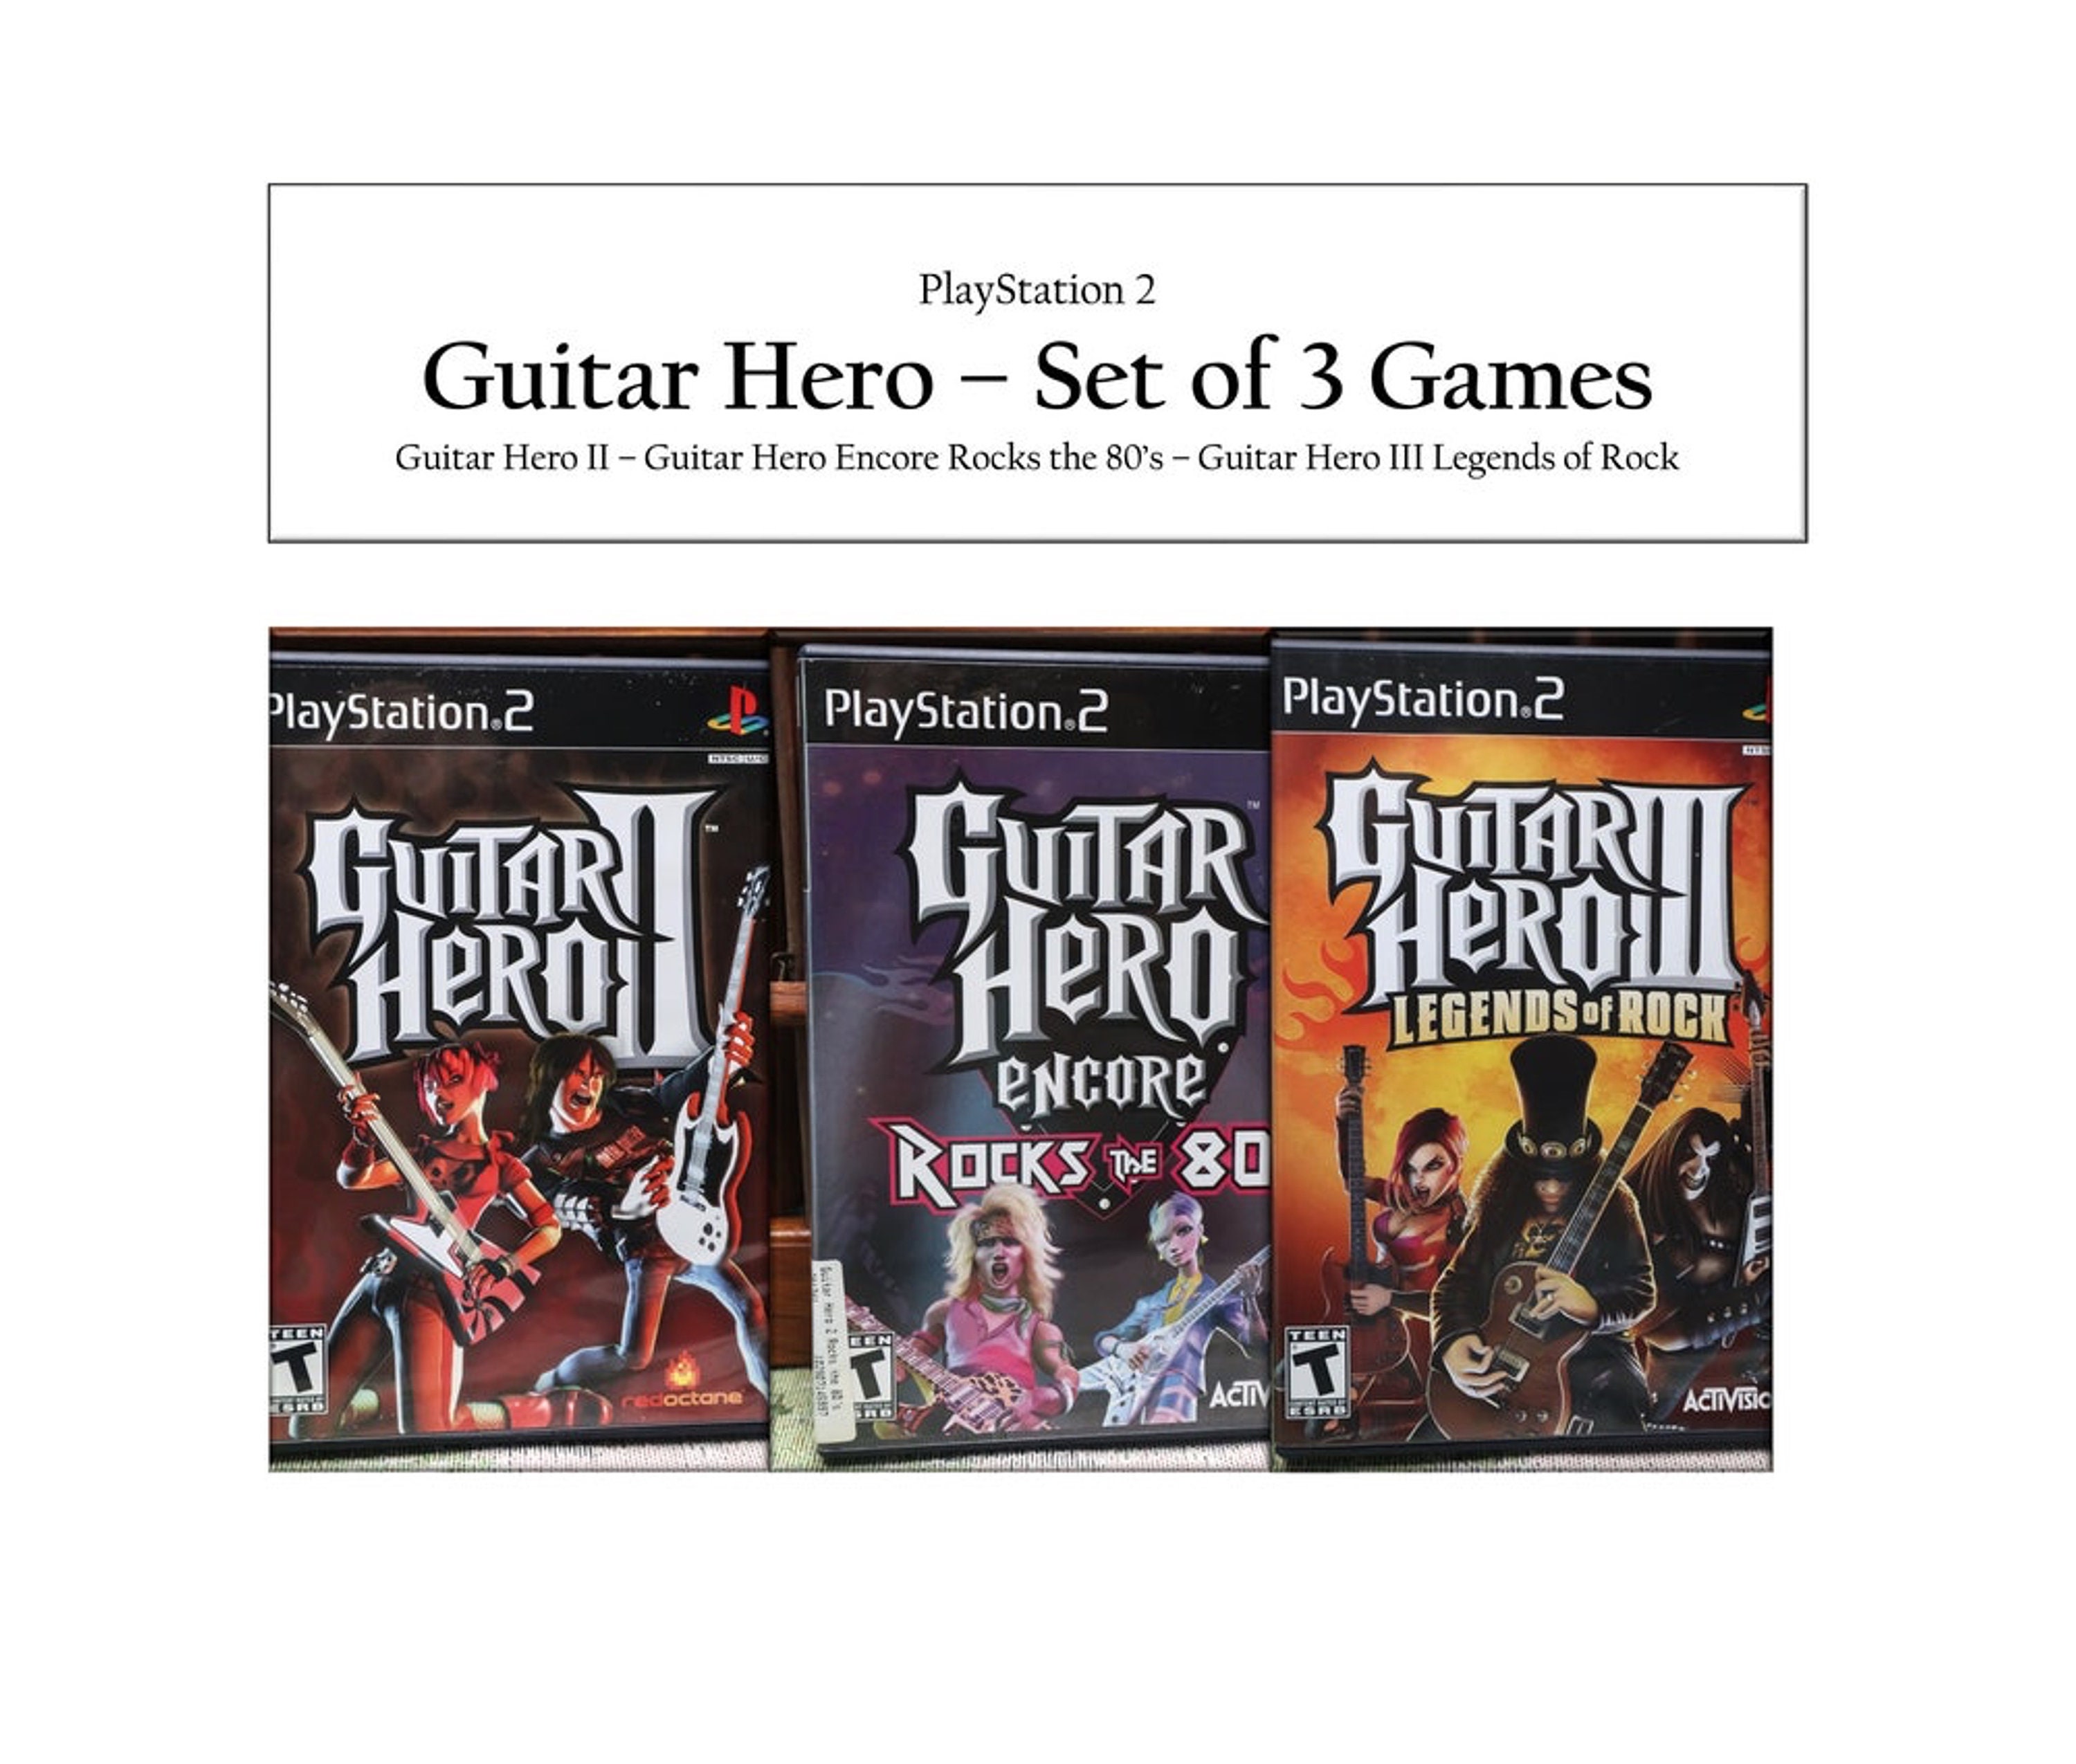 In Stock Now!) Guitar Hero Smash Hits Guitar Game for PS2 +